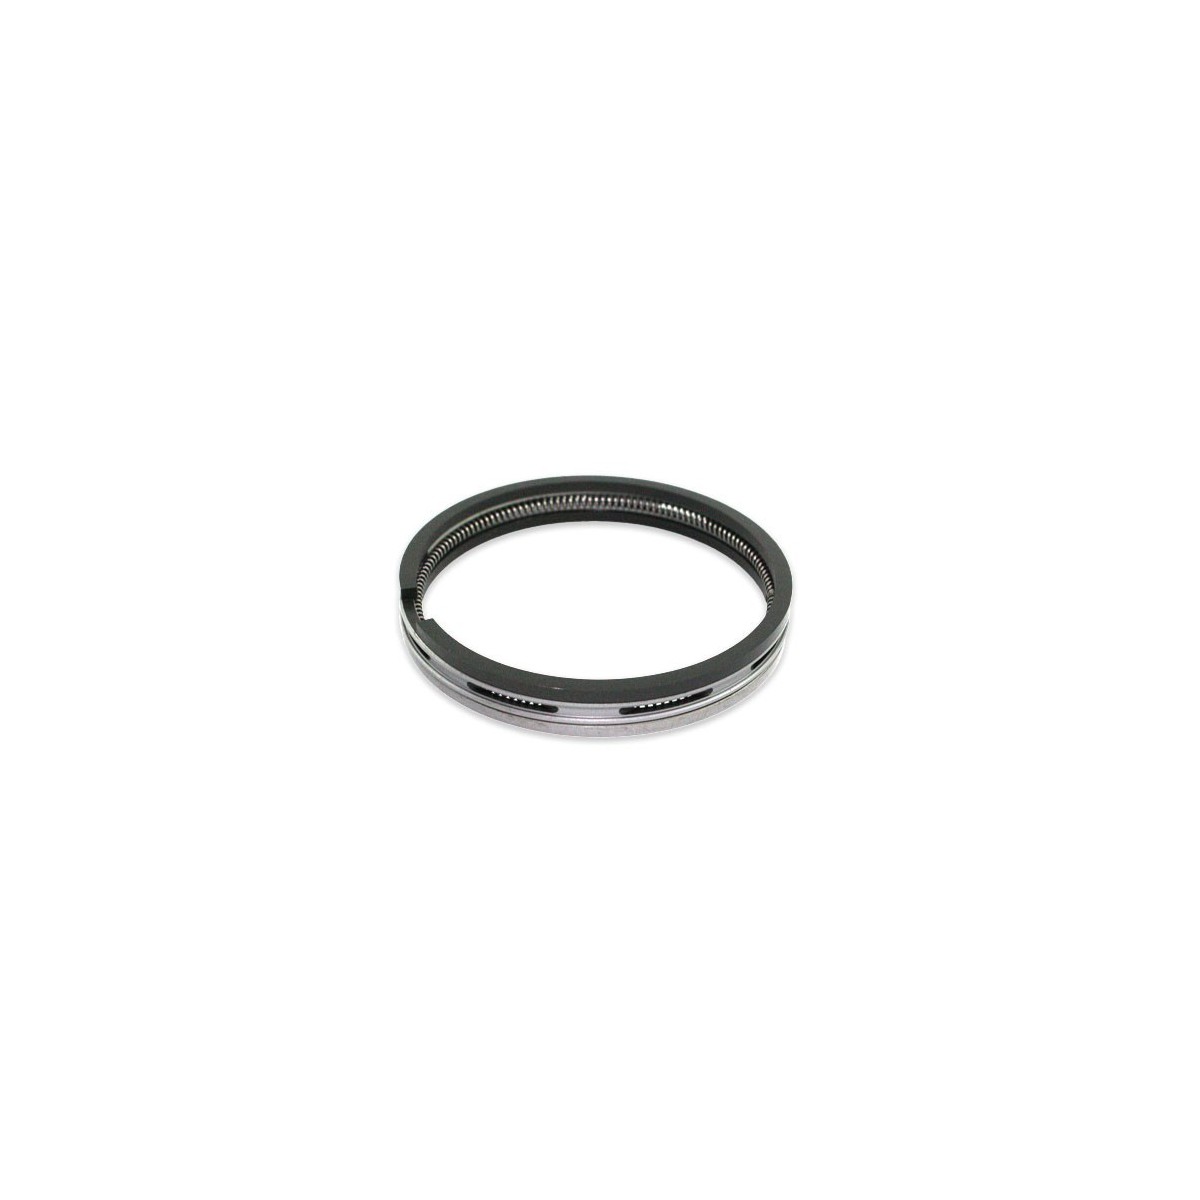 A set of rings for the Yanmar YM1401 F15 piston 72 mm